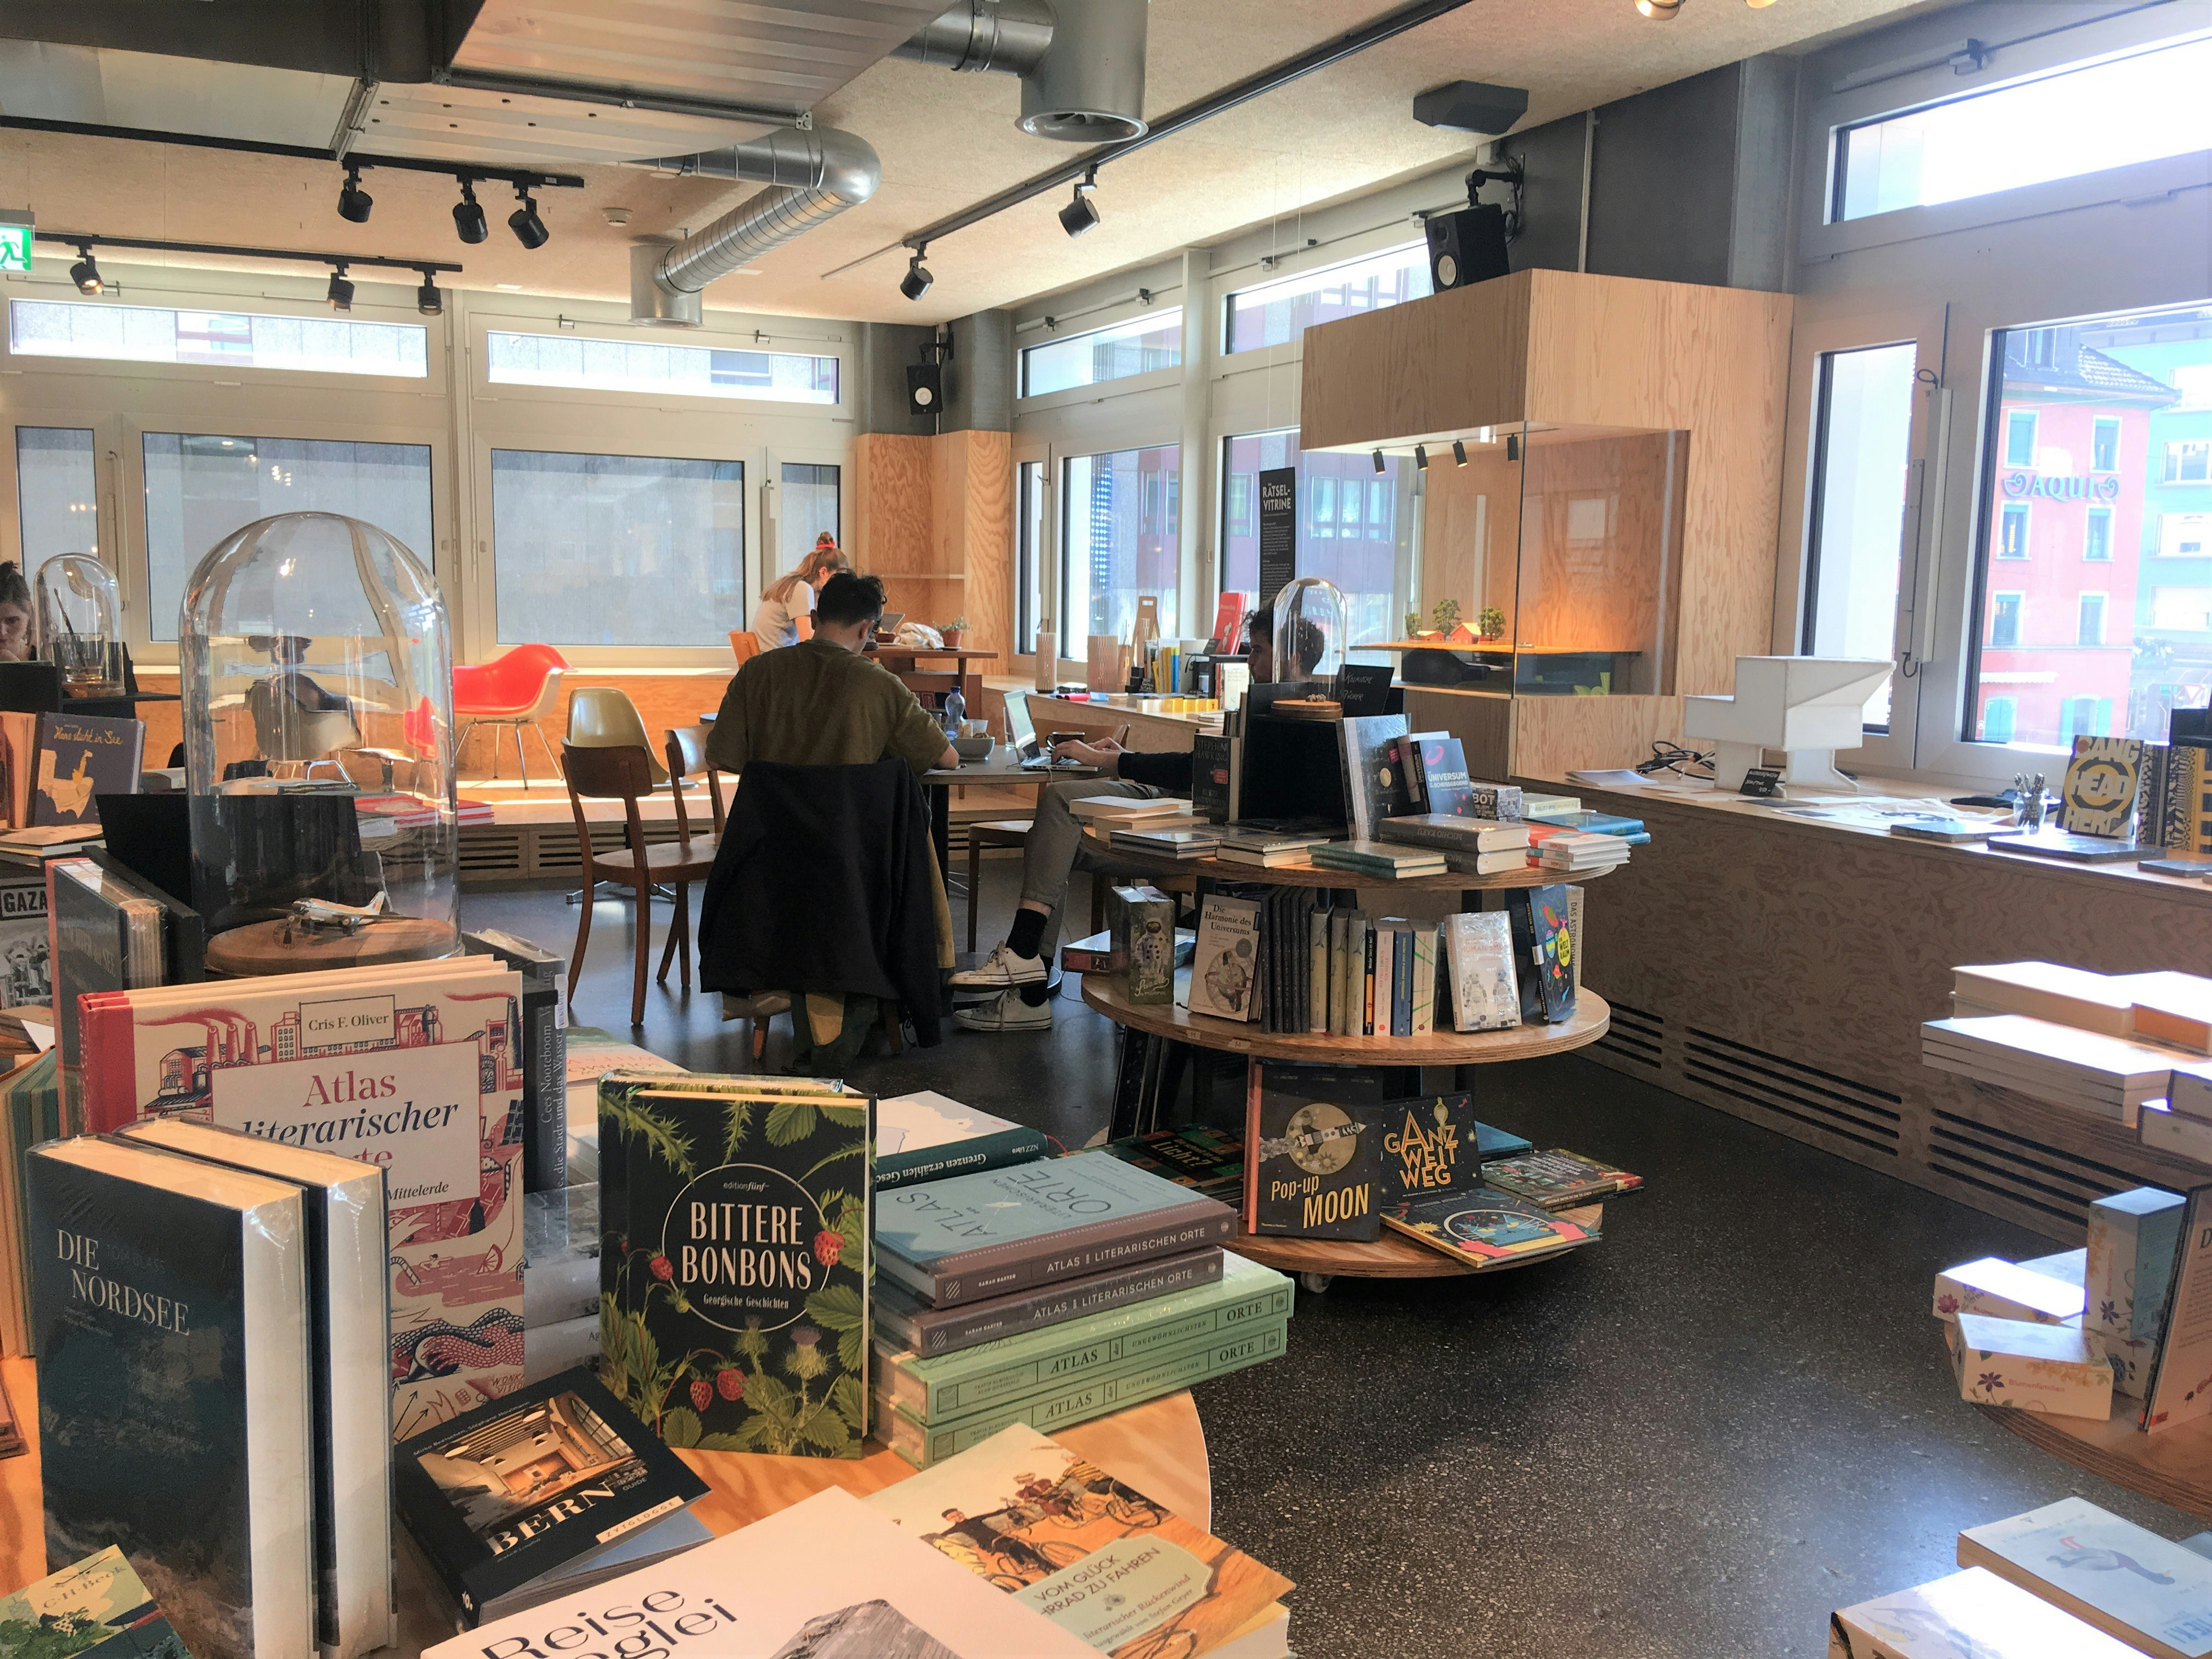 Circular display tables are covered with books for sale in Kosmos: beyond, customers are working at tables while the walls are lined with windows looking over other buildings outside. 